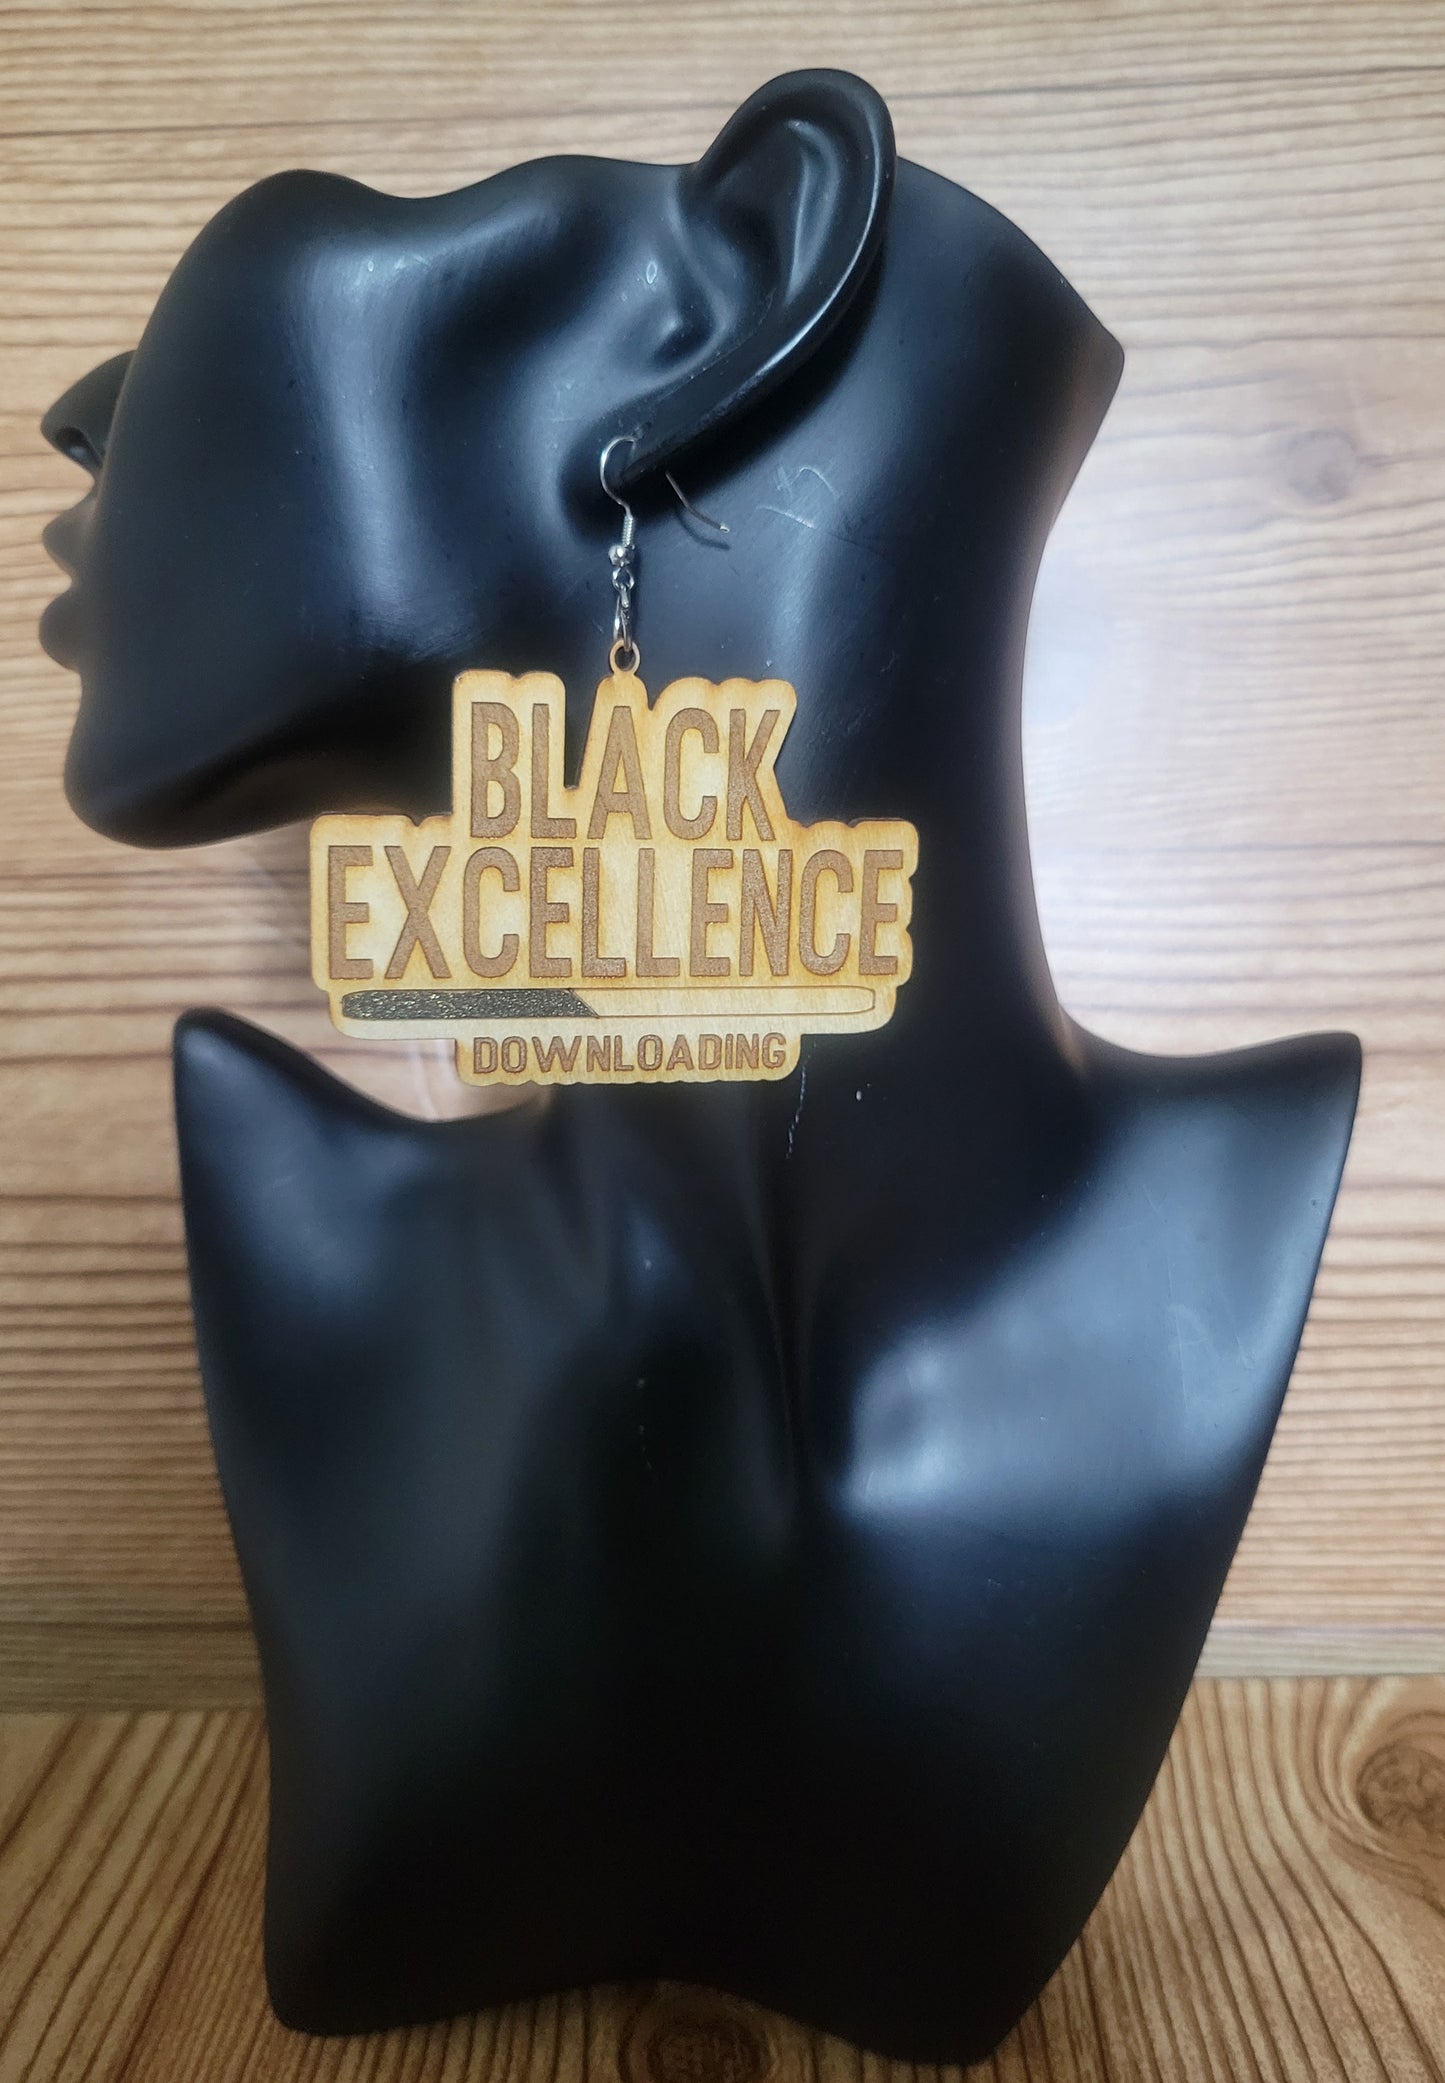 Black Excellence ... Downloading Earrings